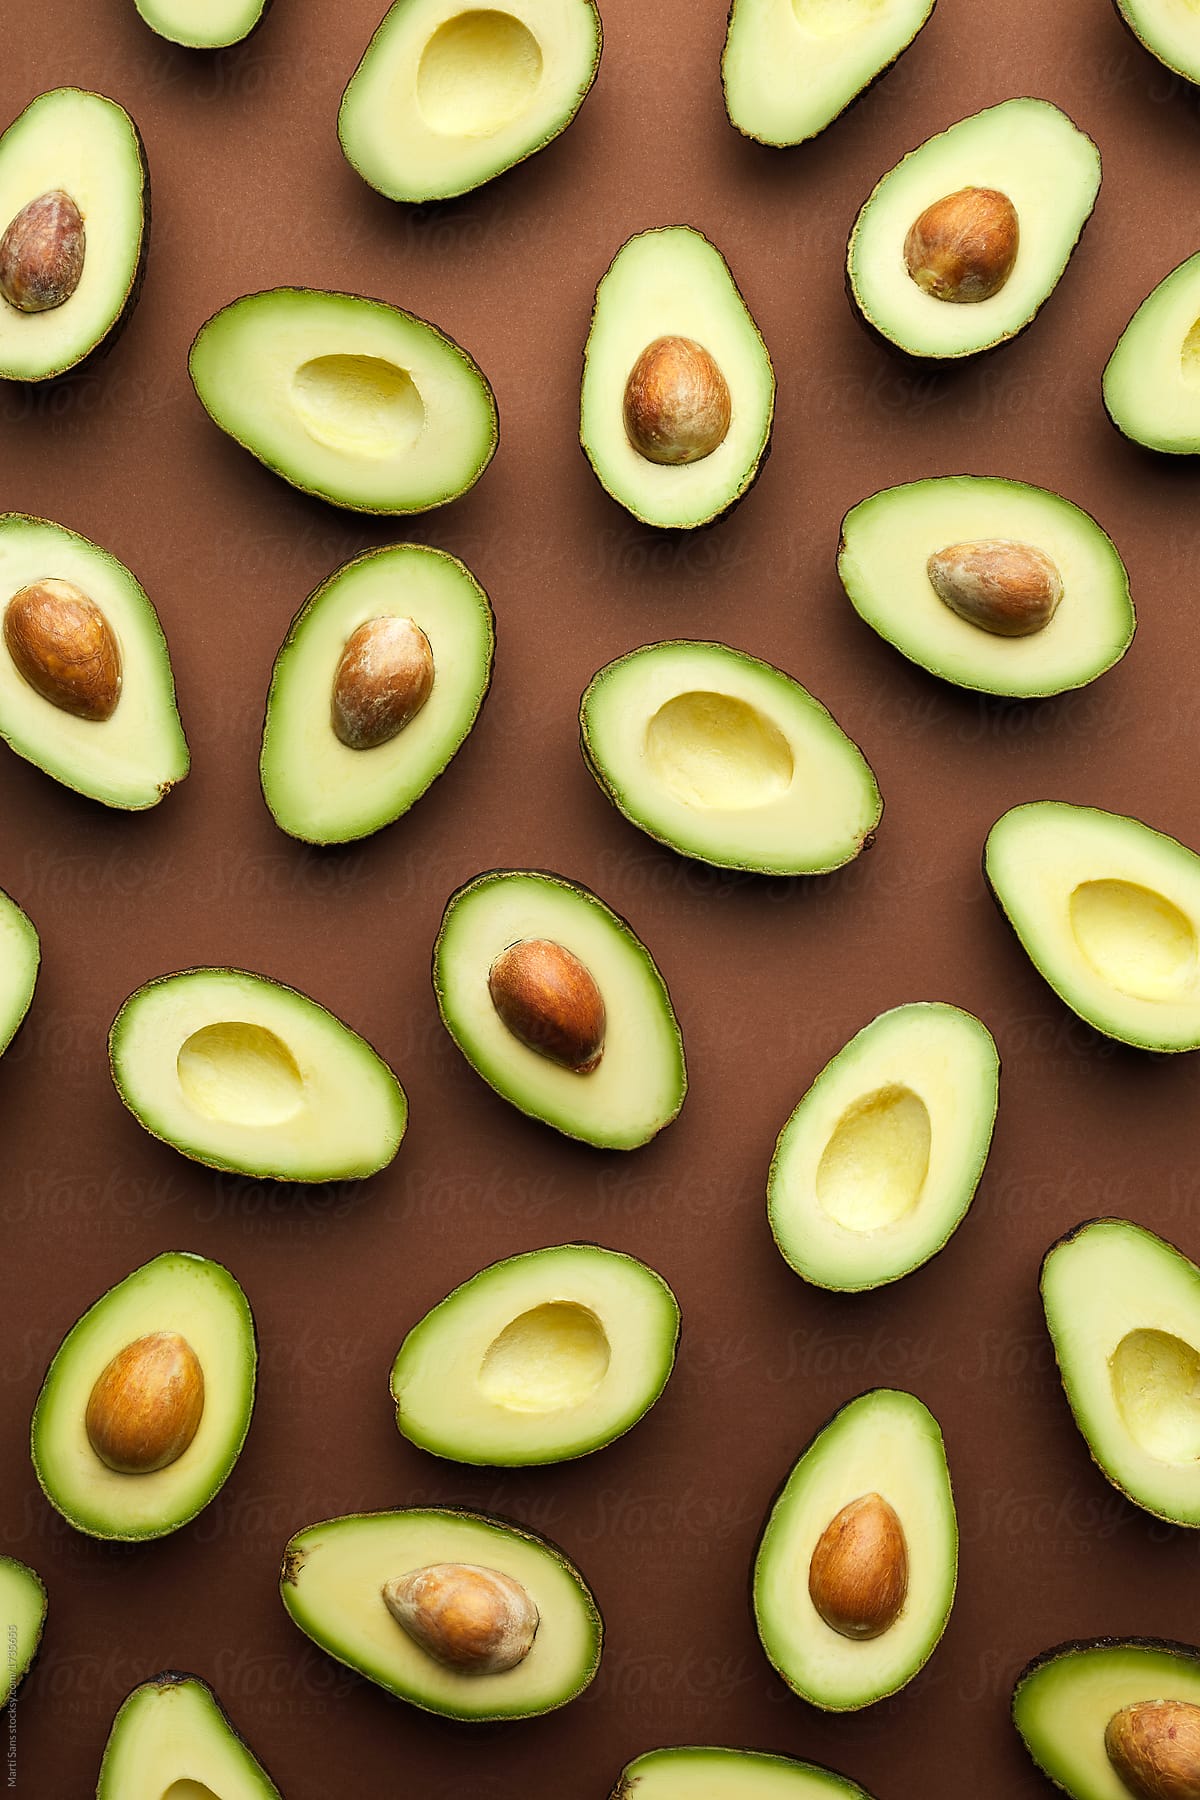 Halved avocados on brown.